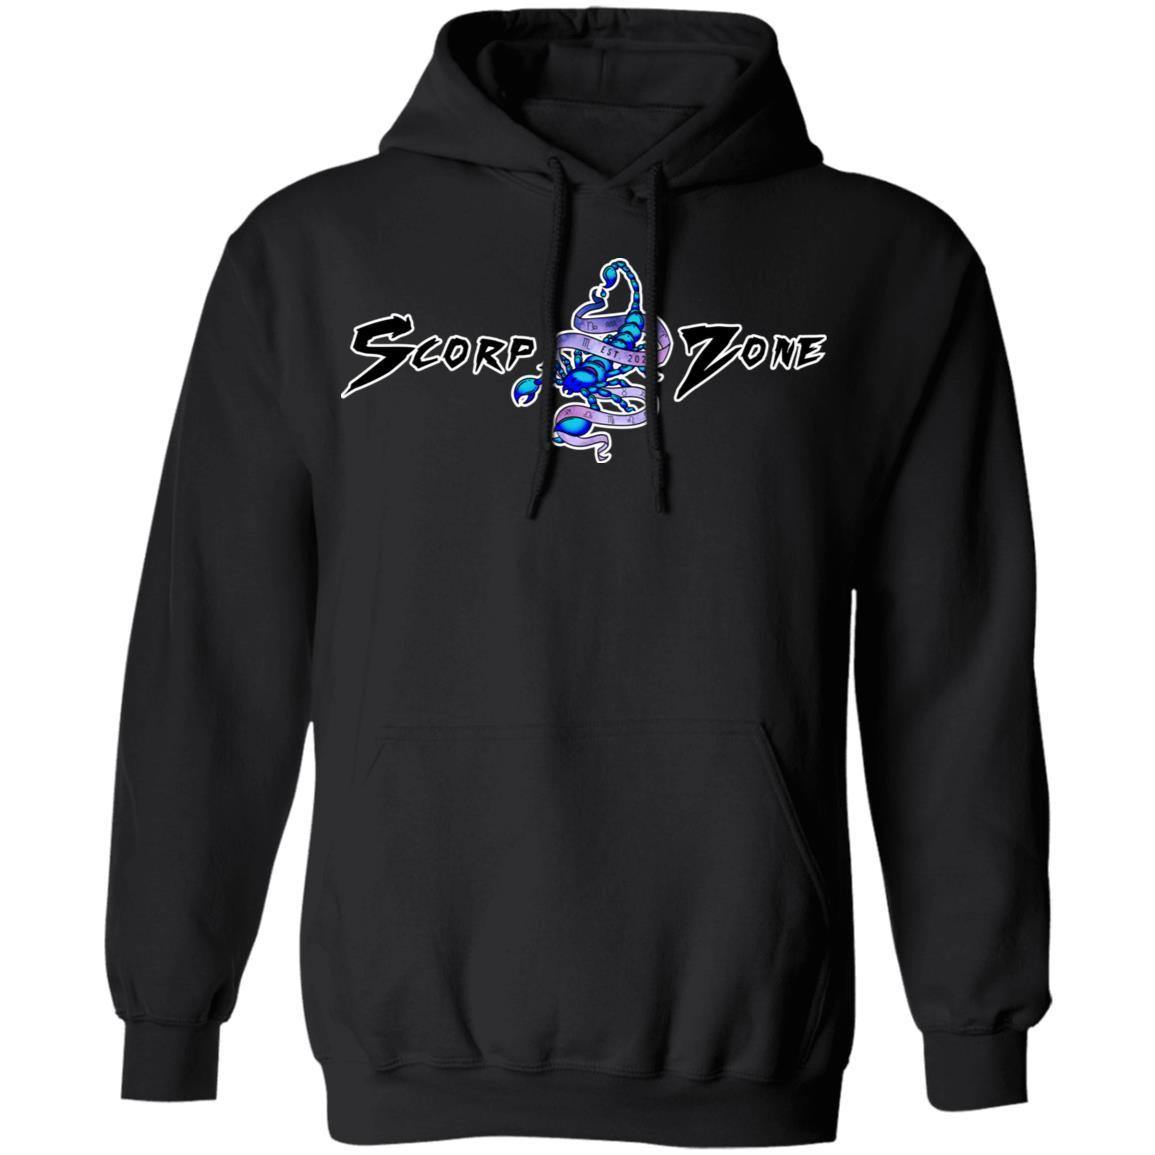 AQUARIUS DESIGN ON BACK AND SMALL SCORP ZONE LOGO ON FRONT -Z66 Pullover Hoodie - ScorpZone